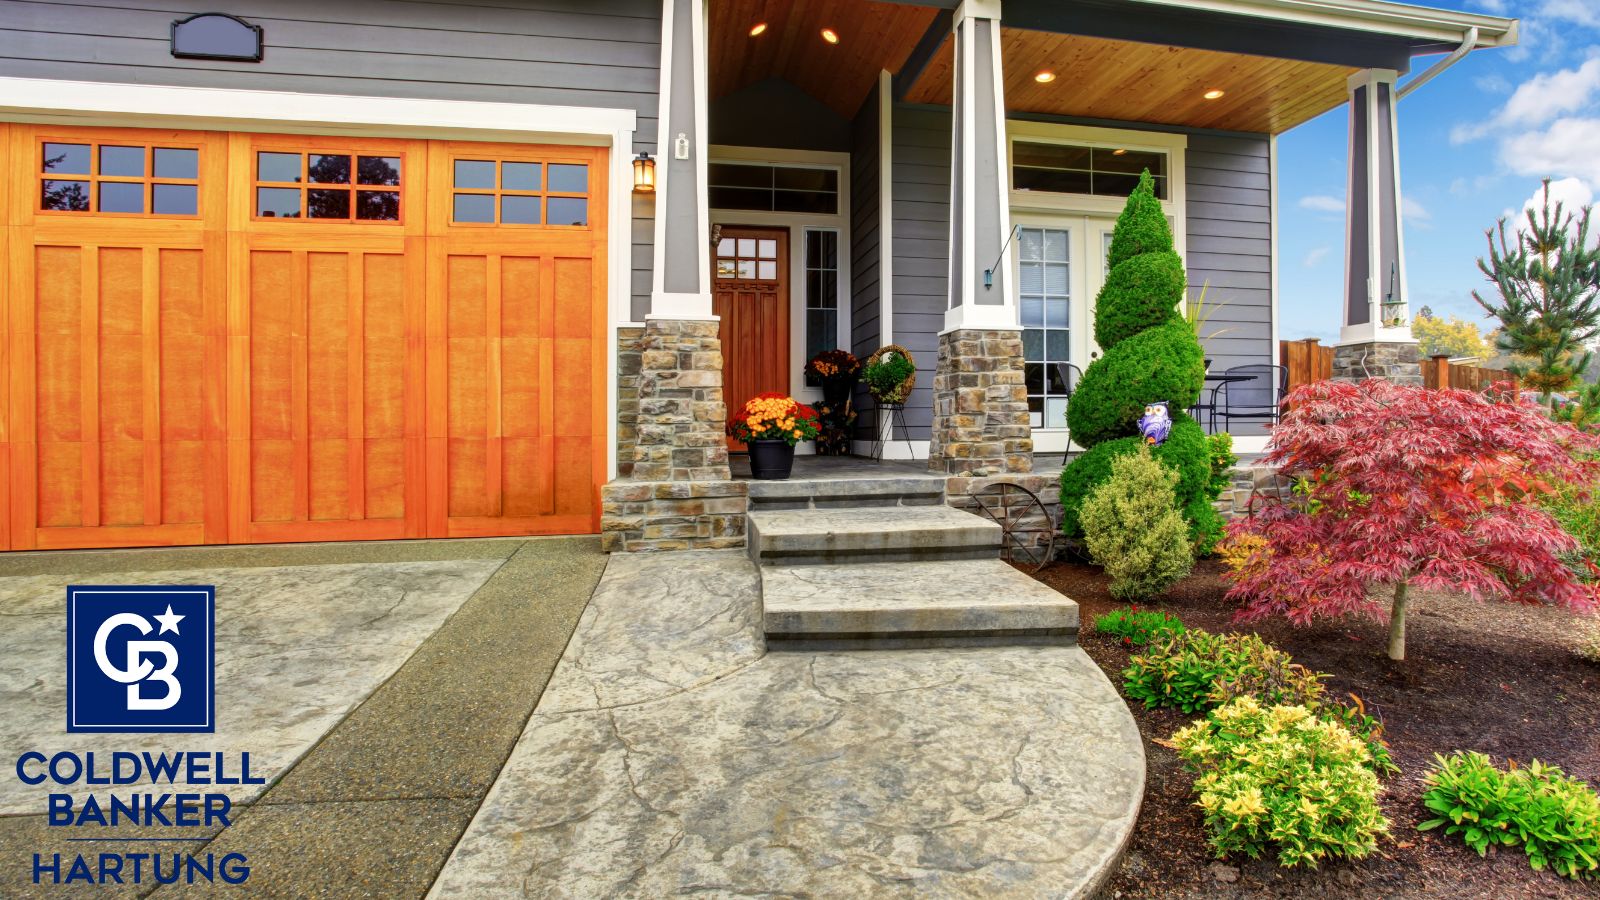 Improving your home's curb appeal doesn't have to be expensive or time-consuming. With a few simple changes, you can transform the look of your home.